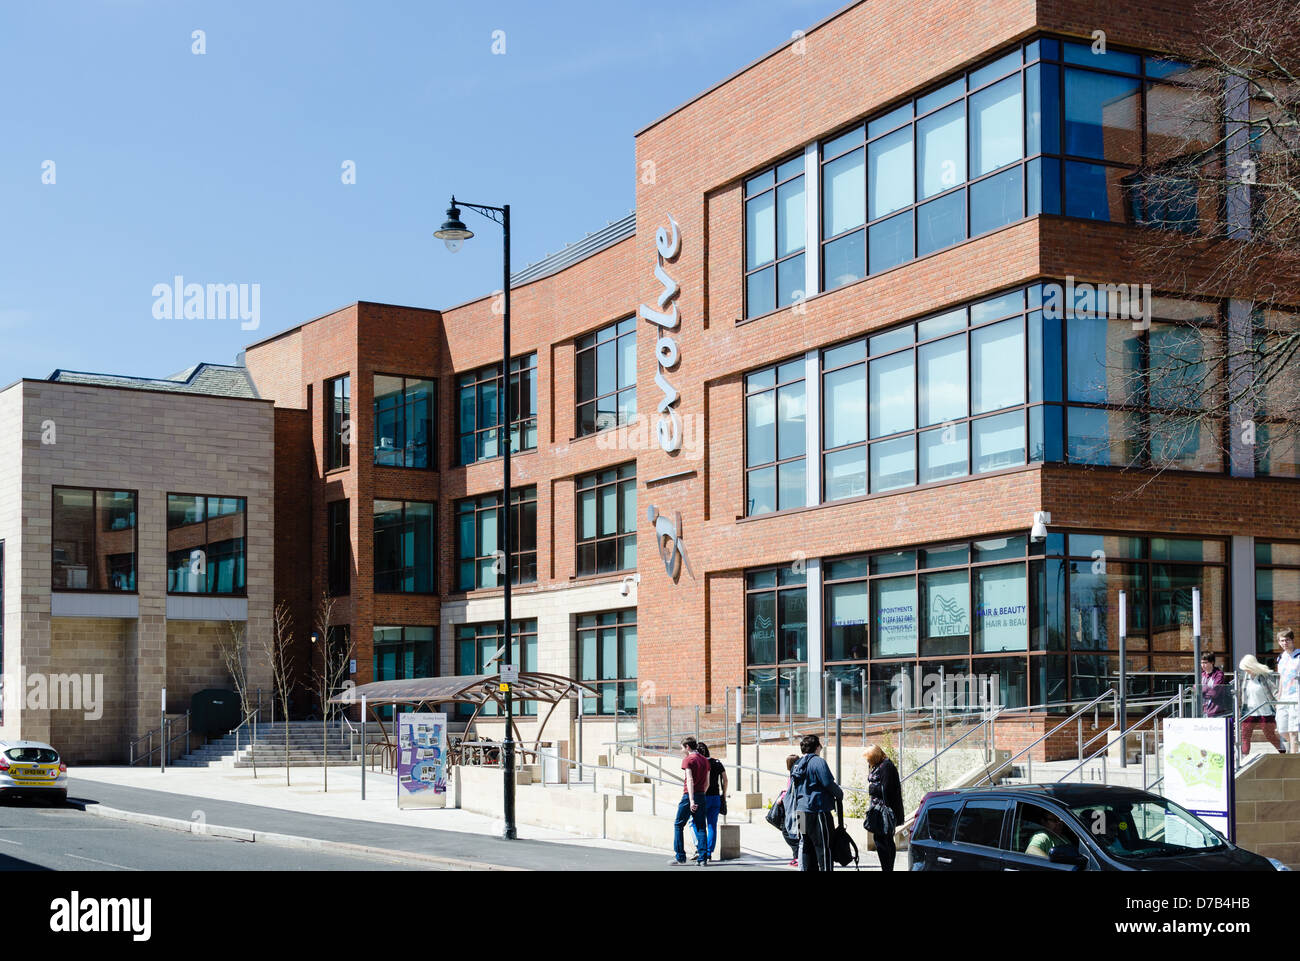 The new building housing Dudley Evolve which is part of Dudley College aimed at post-school education Stock Photo